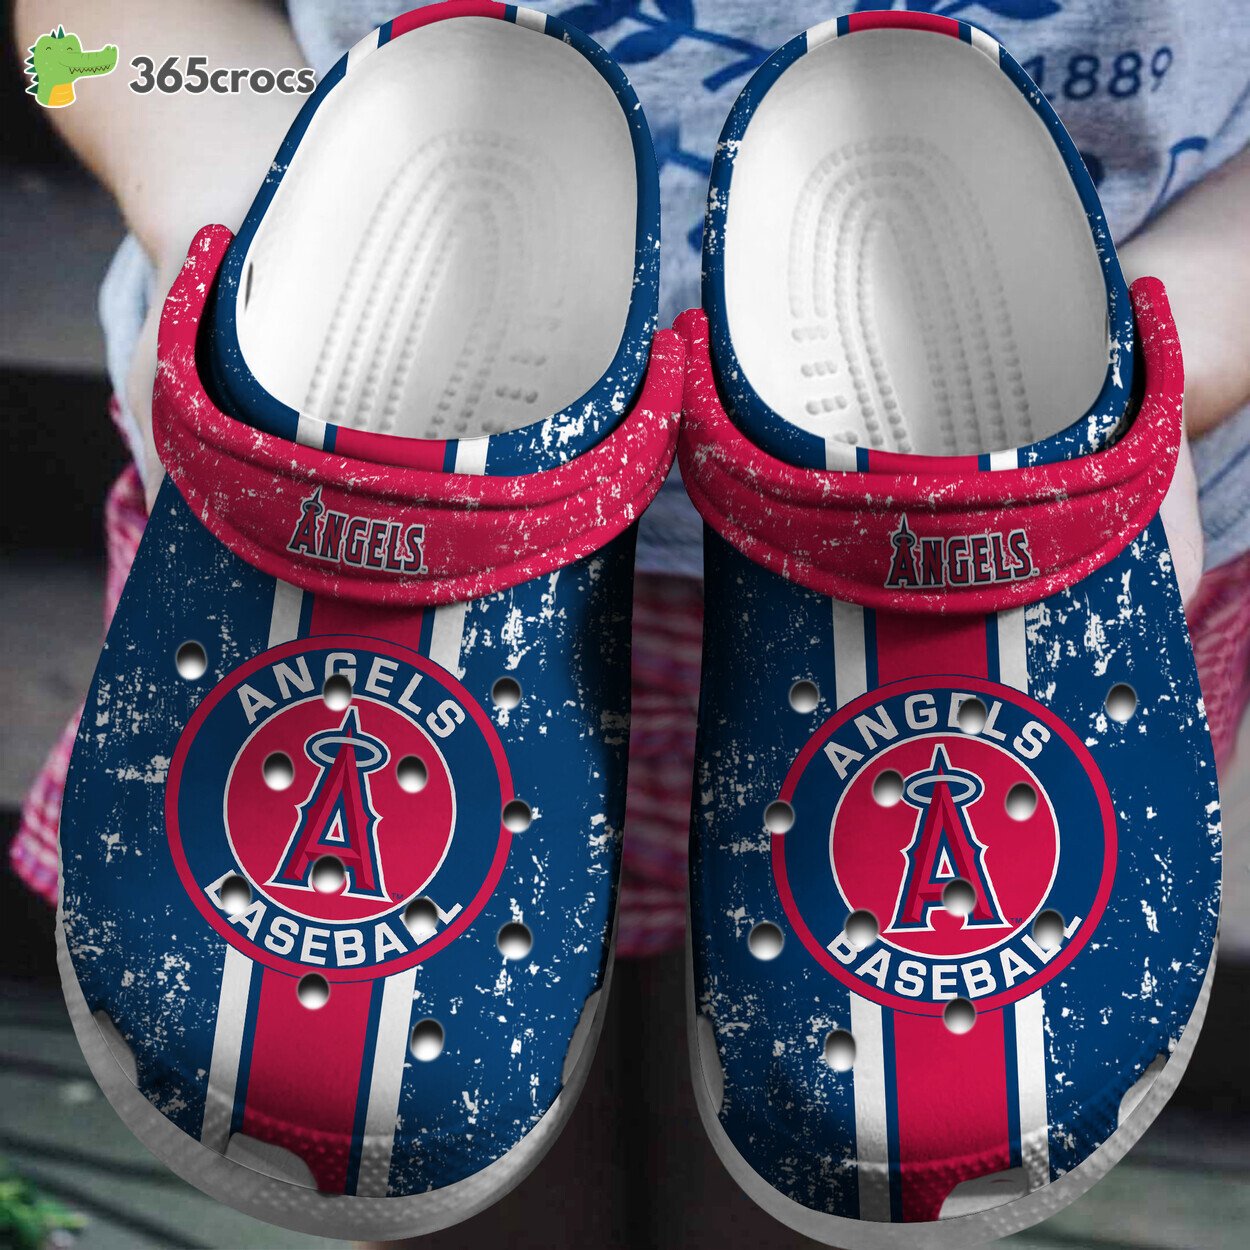 Los Angeles Angels Baseball Team Inspired Clogs Step with Heavenly Team Spirit